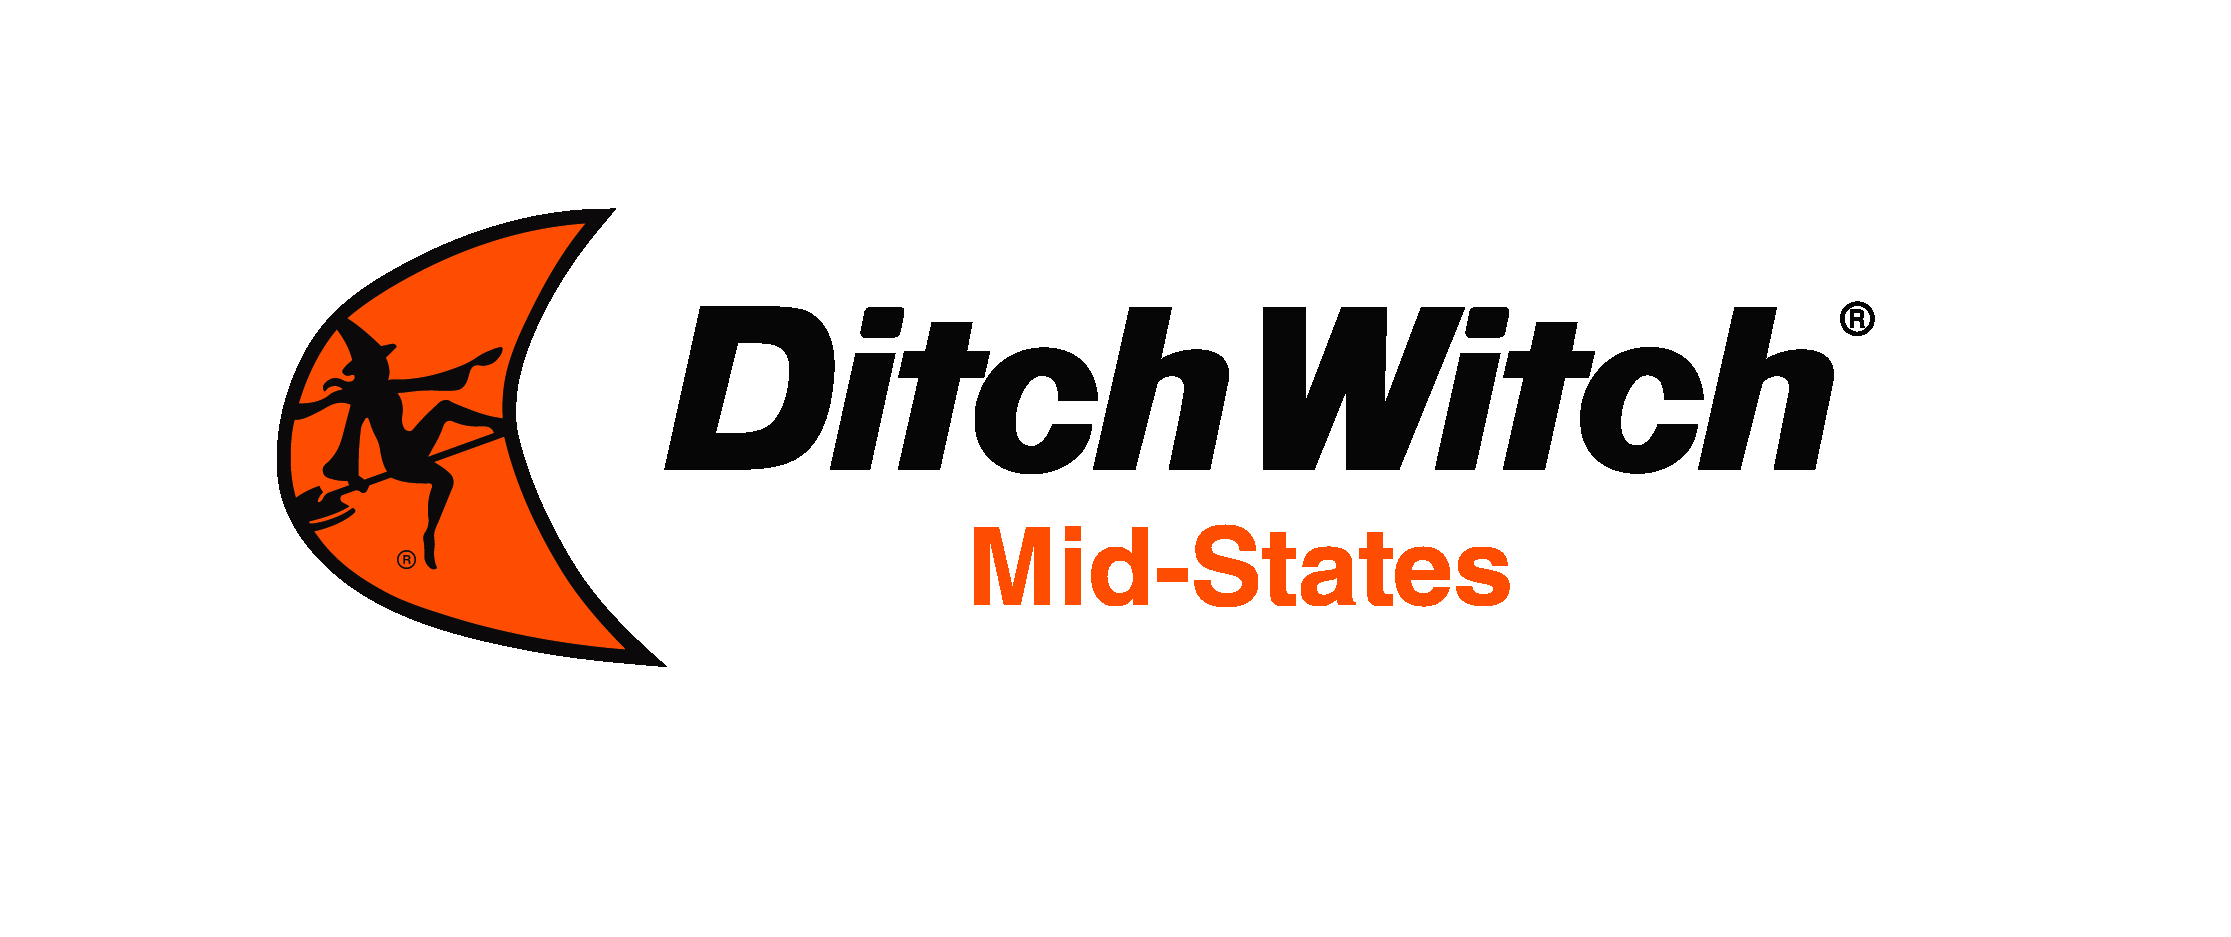 Ditch Witch Mid-States company logo